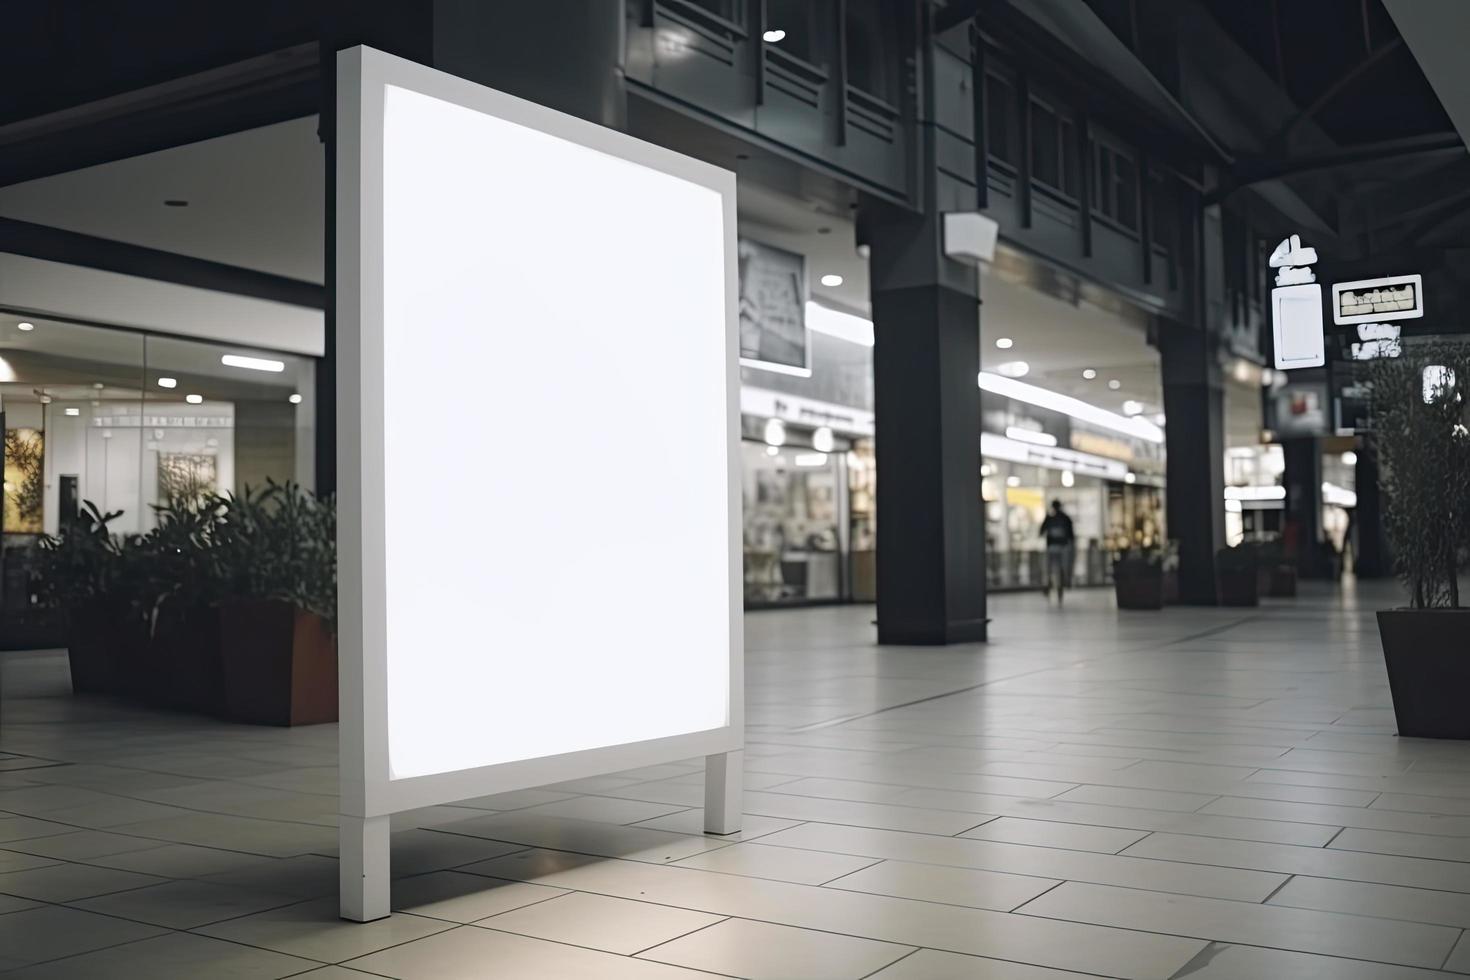 public shopping center mall or business center advertisement board space as empty blank white mockup signboard photo